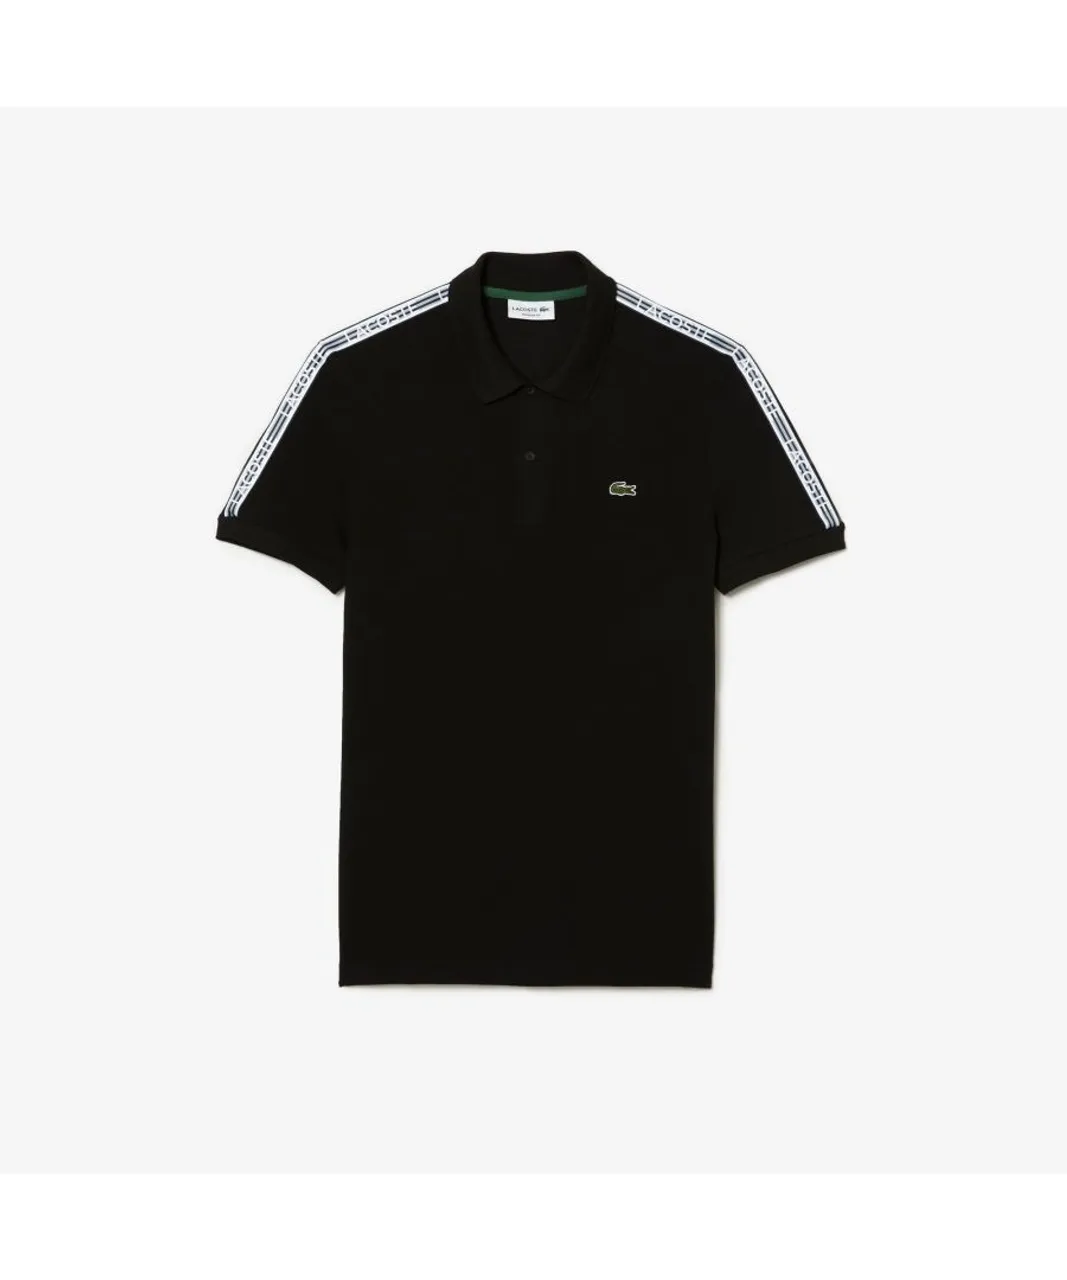 Lacoste Mens Short Sleeve Tape Pique Polo Shirt in Black Cotton